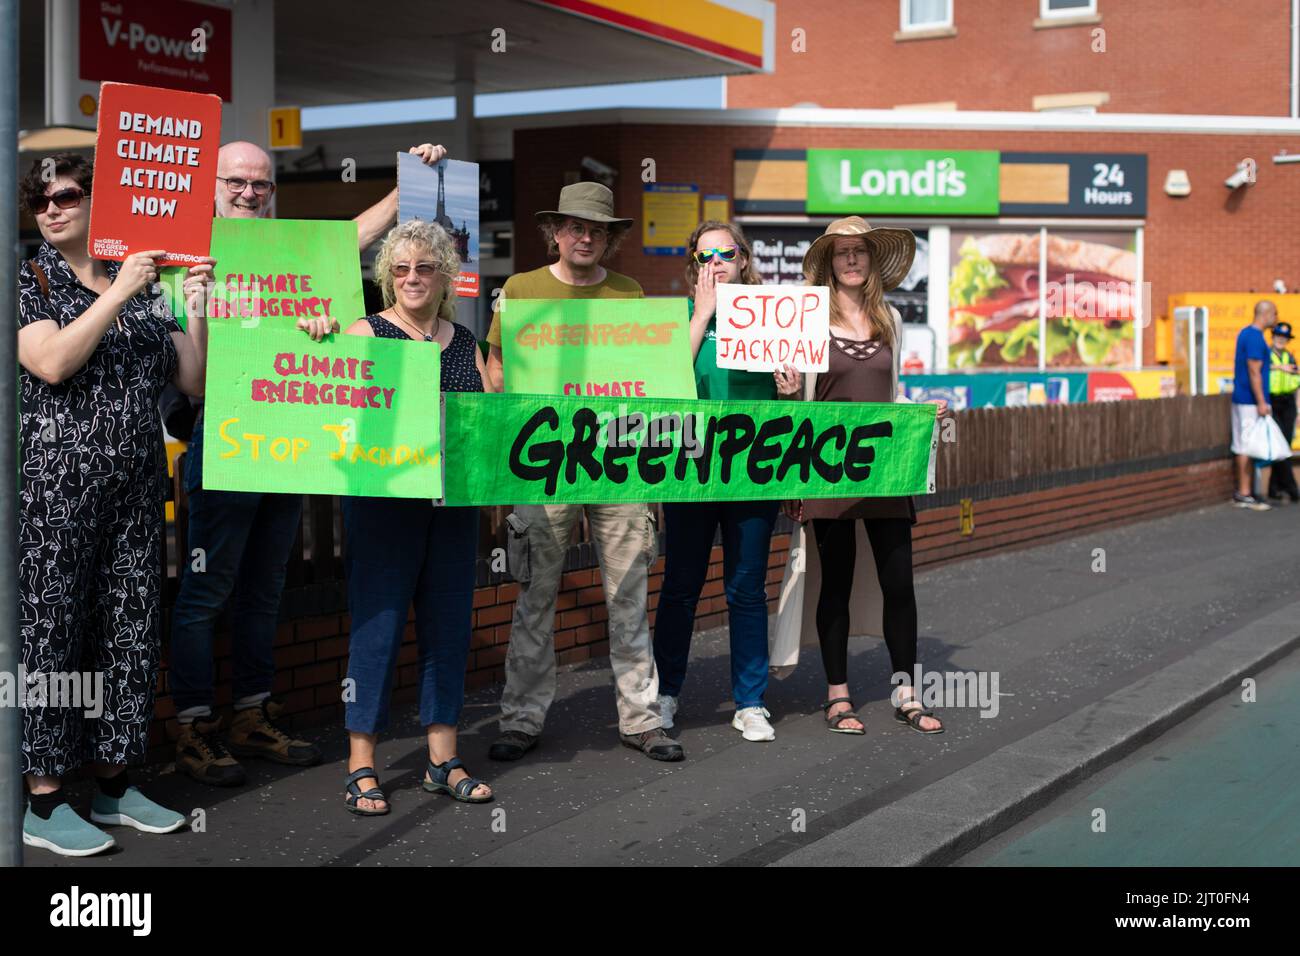 Manchester, UK. 27th Aug, 2022. Members of the environment group Greenpeace protest outside a Shell forecourt. The movement is trying to raise awareness of the proposed Jackdaw oilfield in the north sea which will only add to the climate emergency. Credit: Andy Barton/Alamy Live News Stock Photo